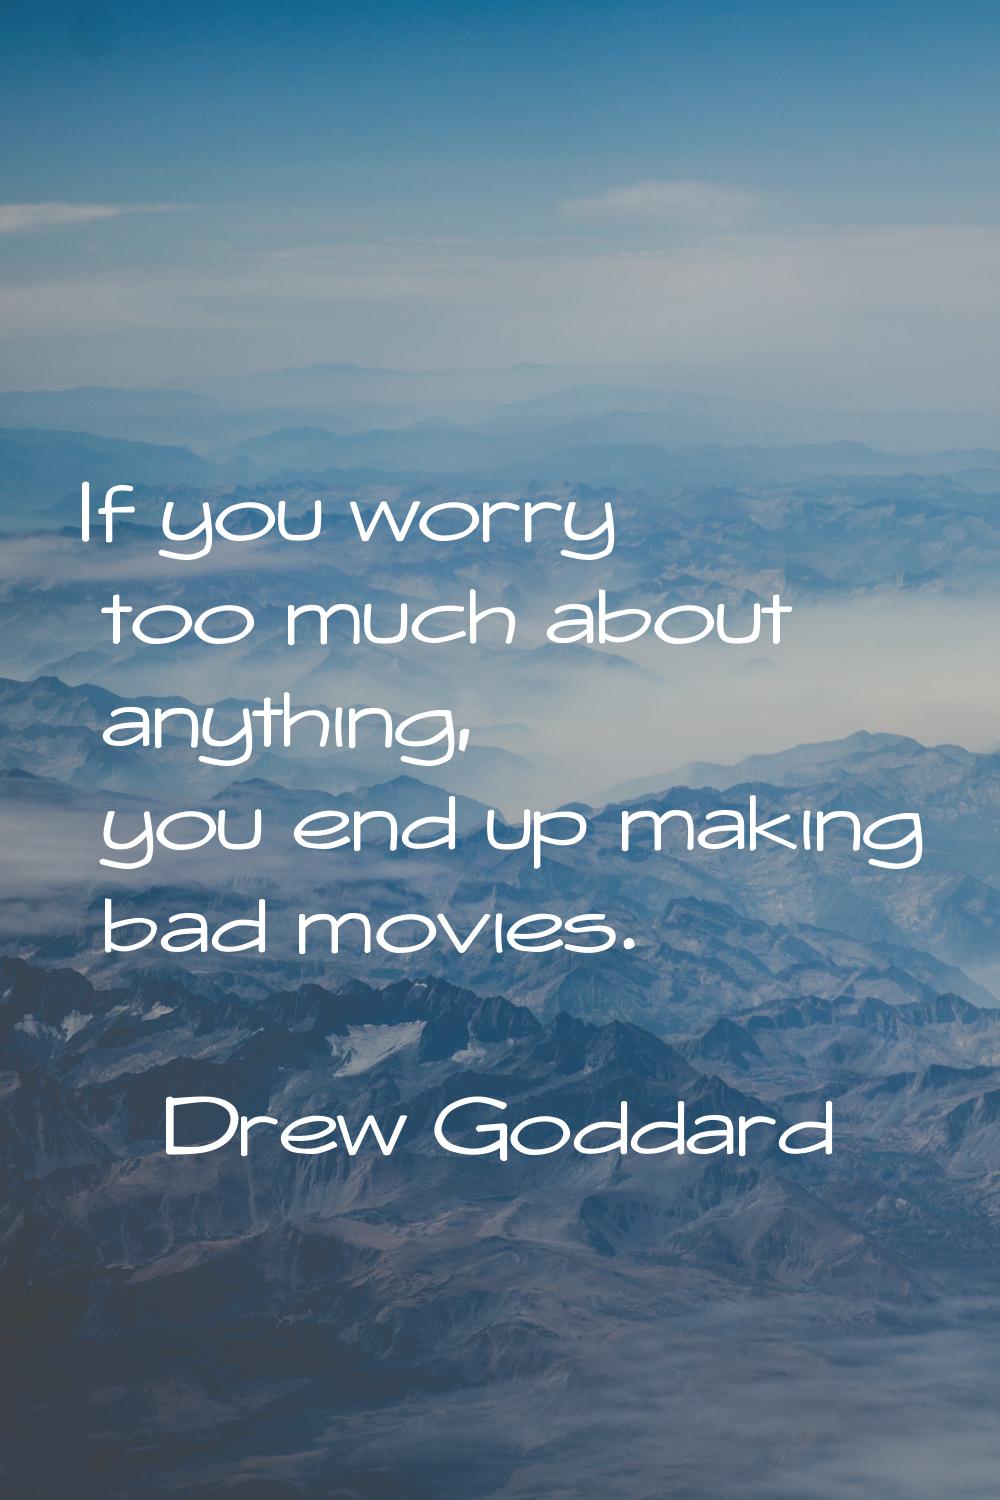 If you worry too much about anything, you end up making bad movies.